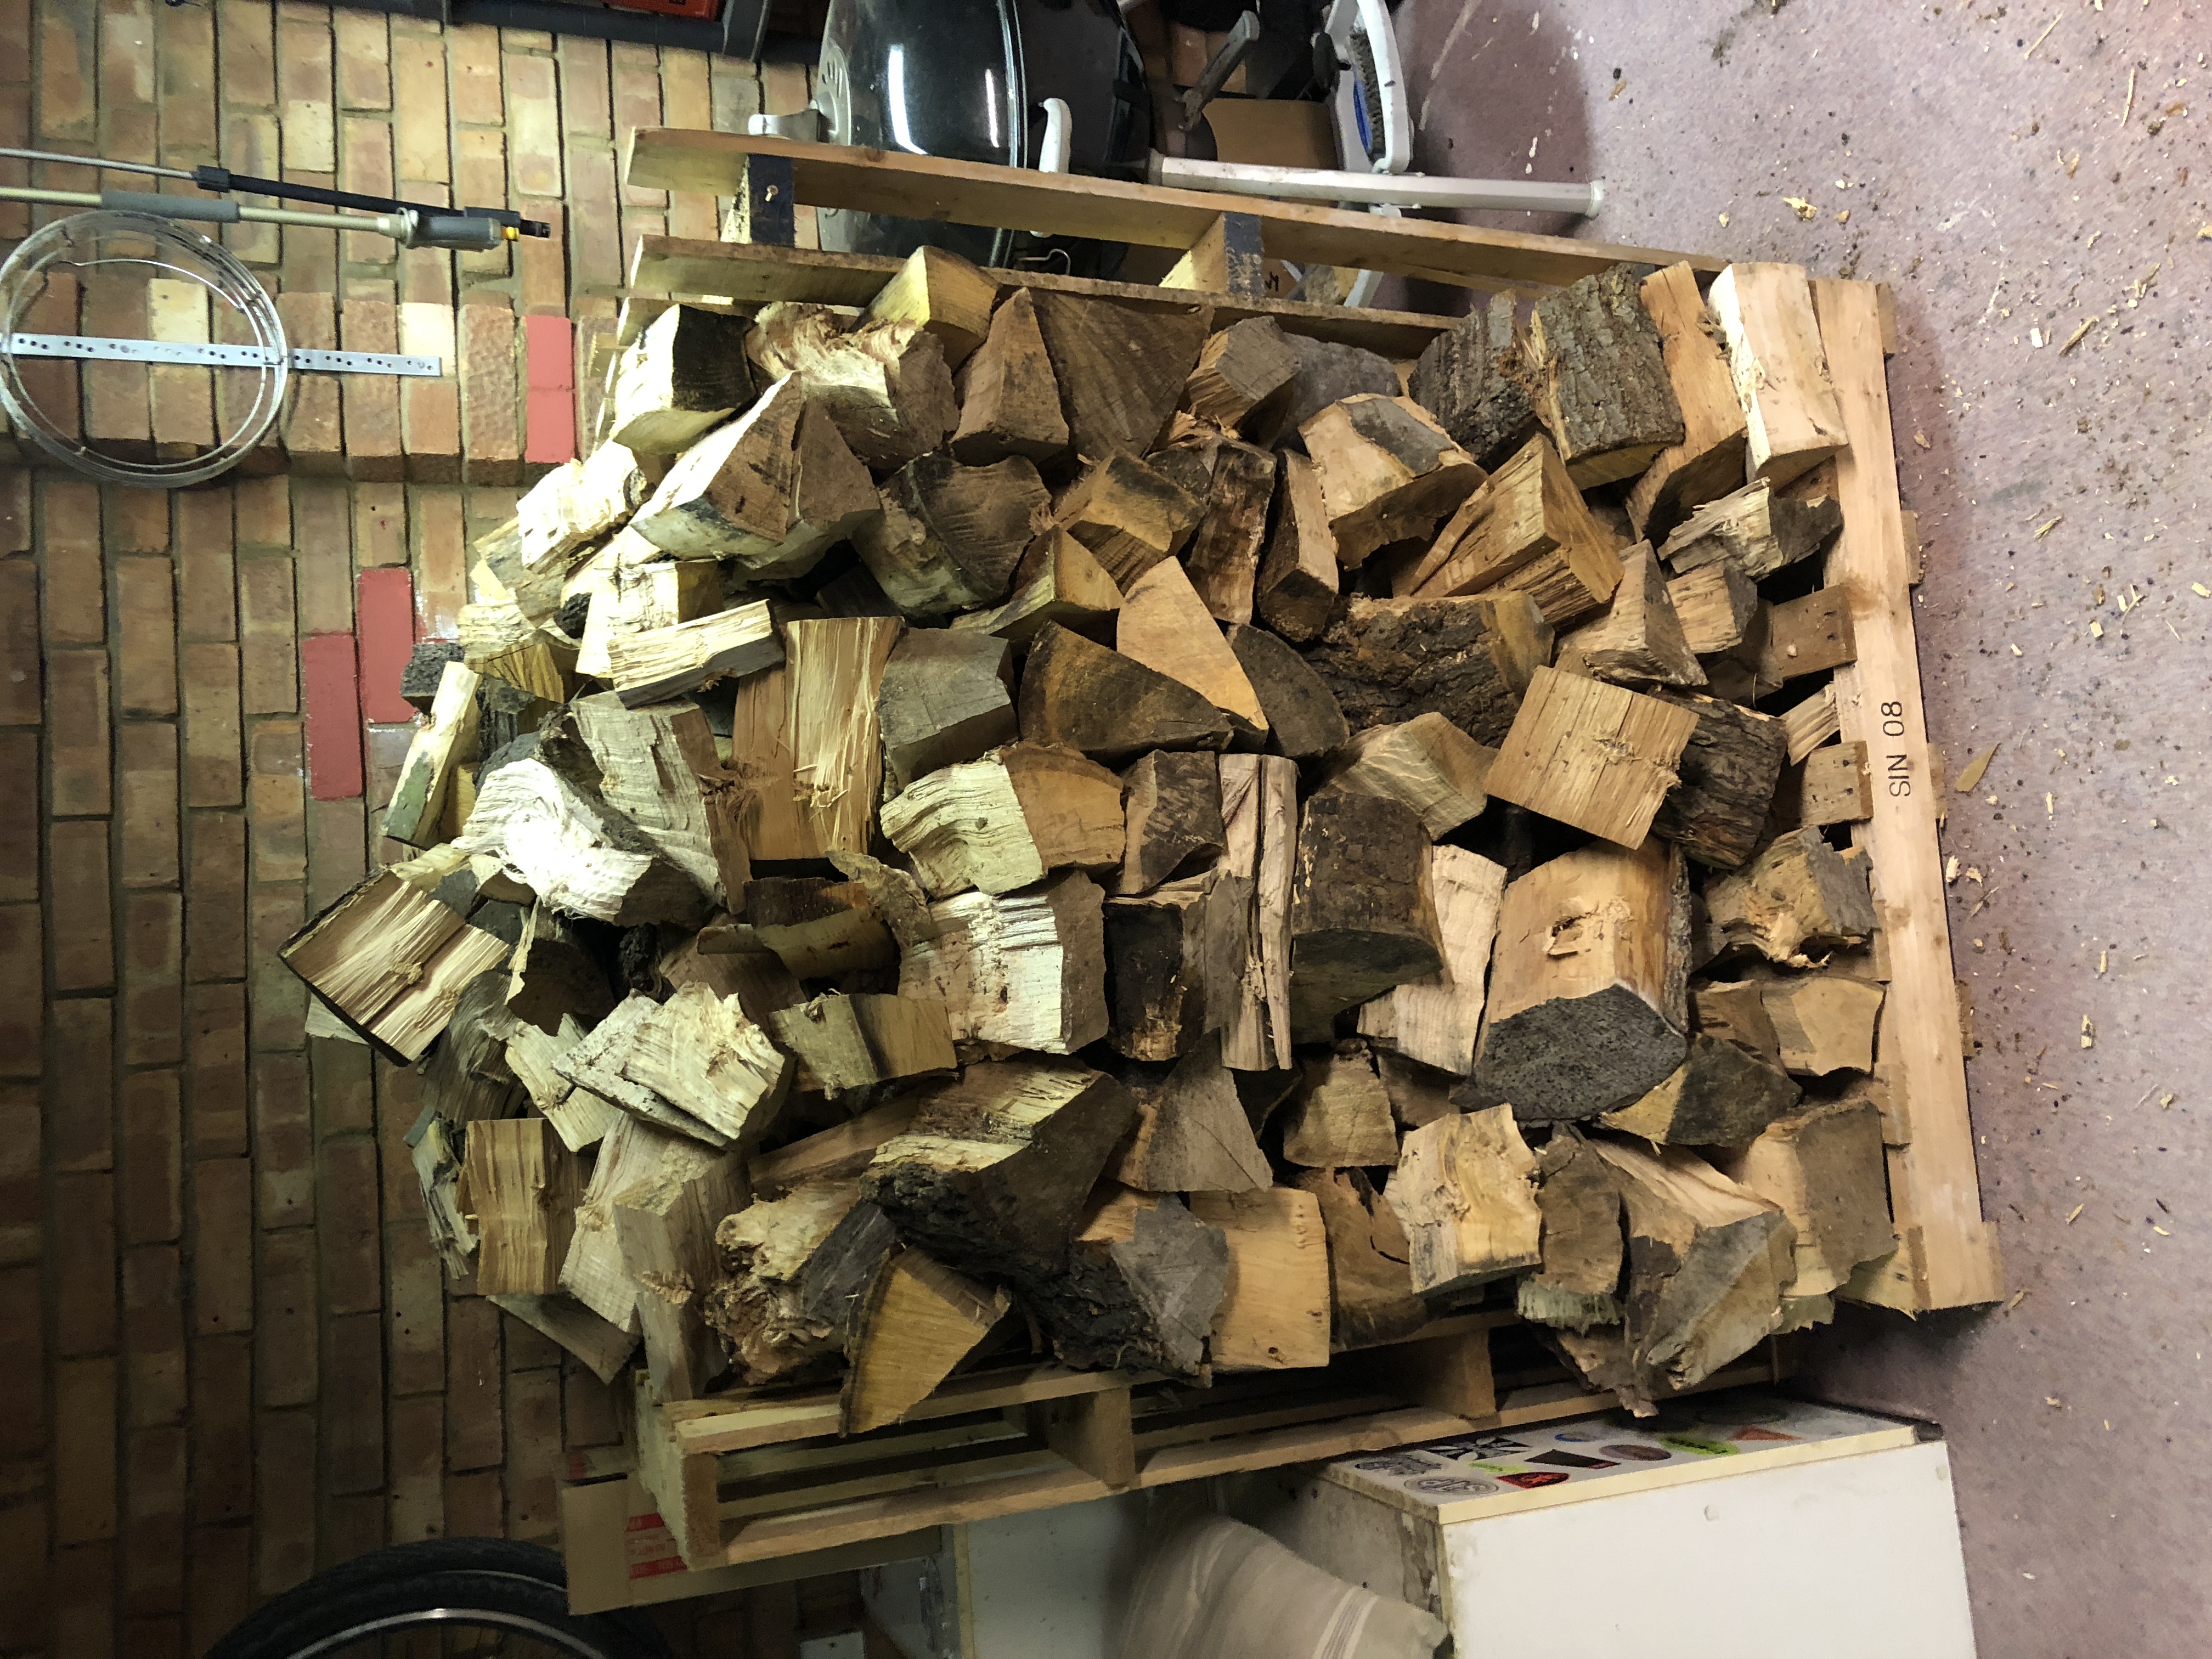 Show me your wood burner before and after pics  - Page 1 - Homes, Gardens and DIY - PistonHeads